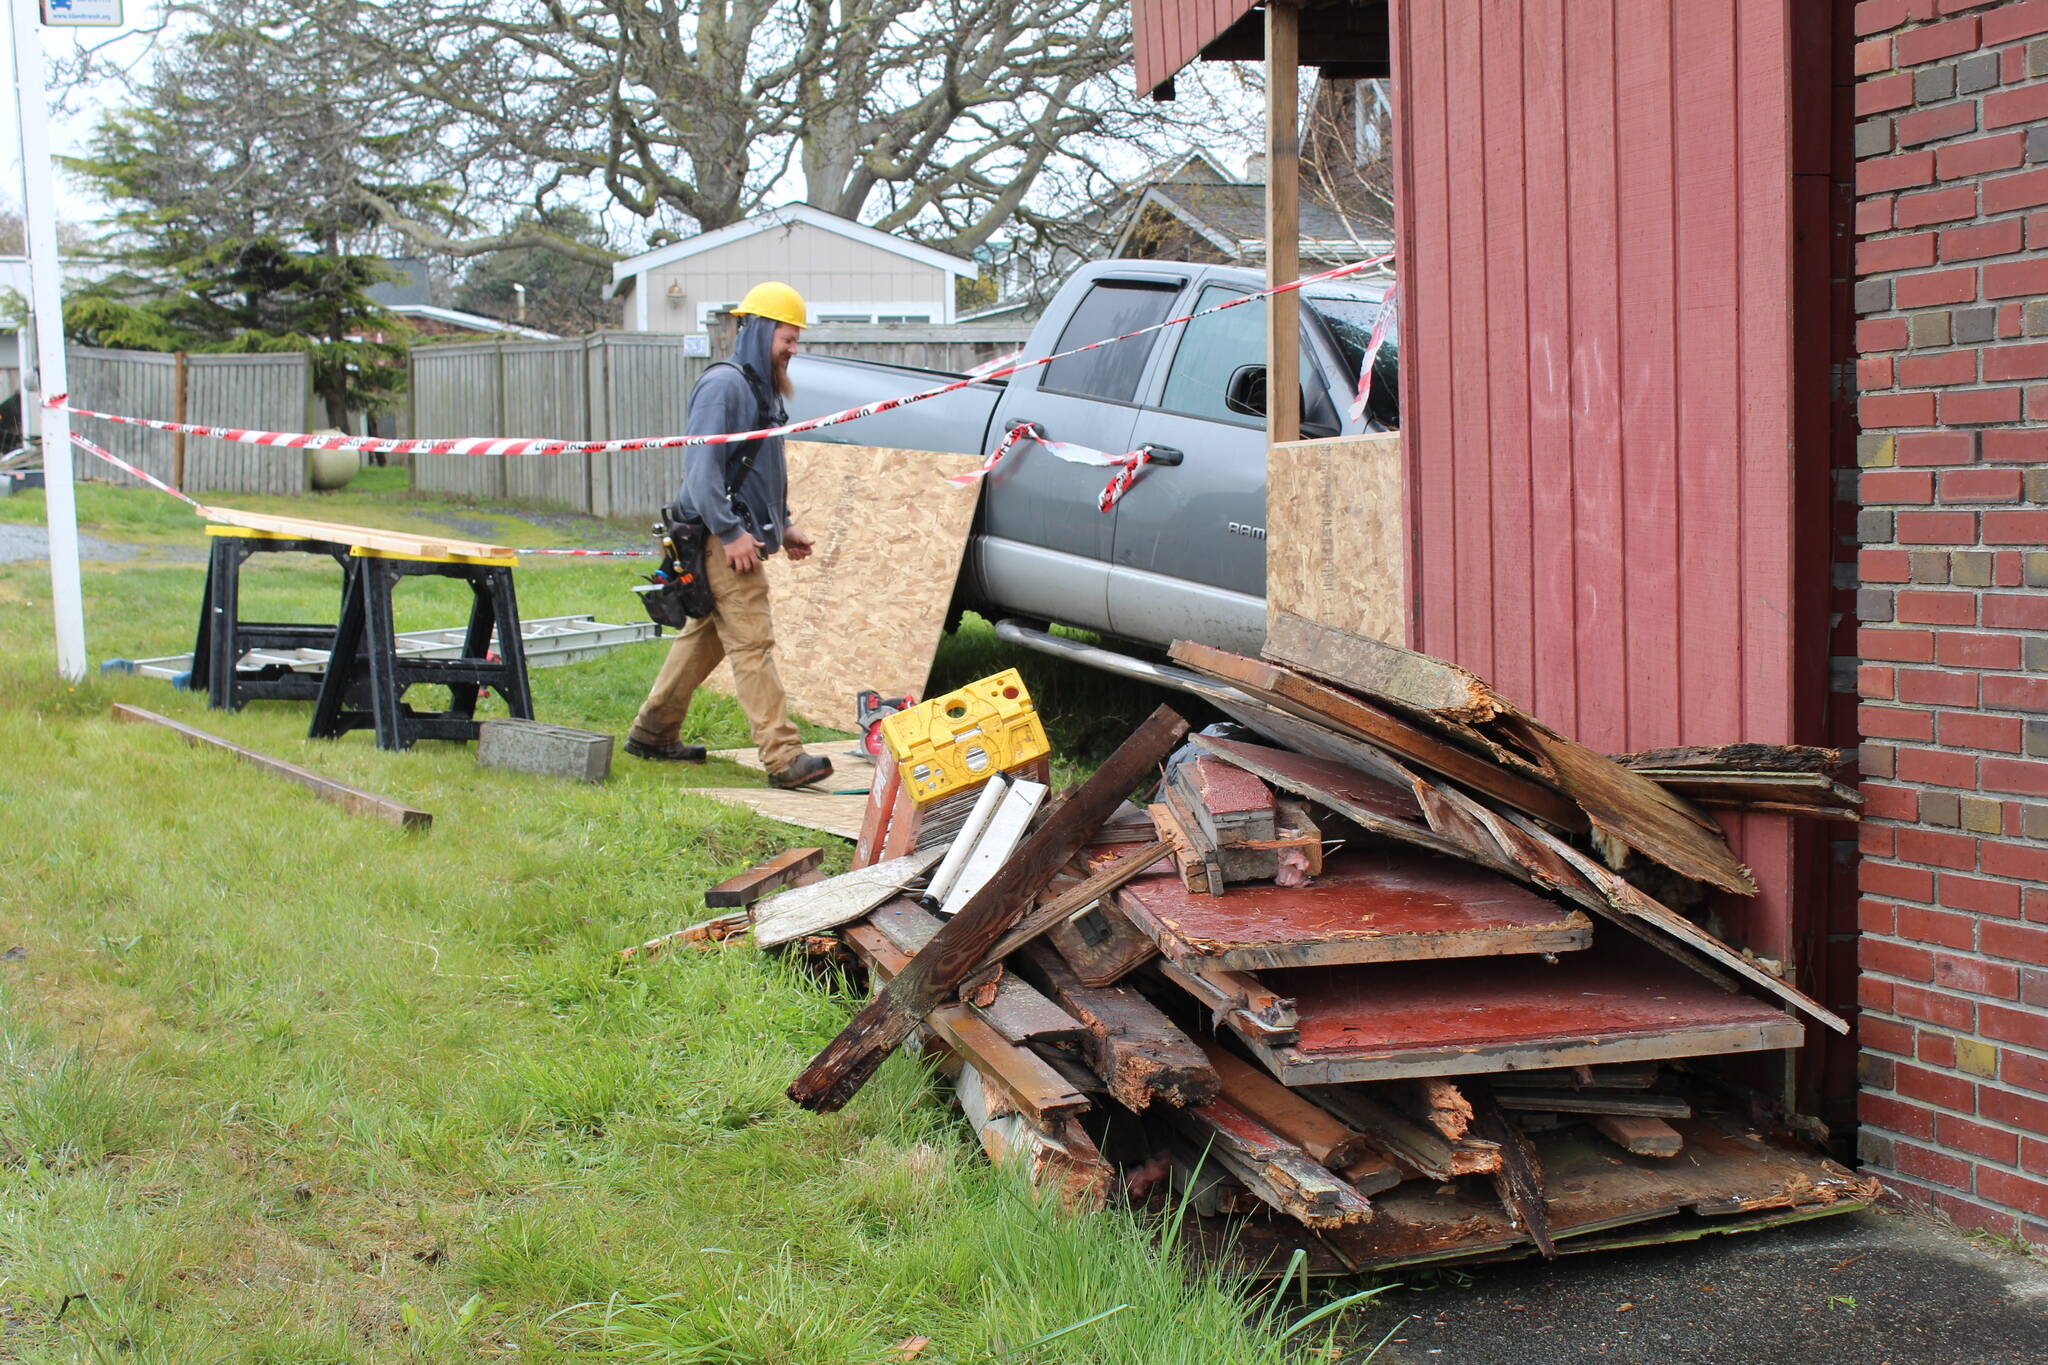 Construction workers repair damage done by a truck that crashed into the wooden building adjacent to Penn Cove Pottery. As of Monday afternoon, the truck had not been removed due to structural integrity concerns at the site of the accident. (Photo by Karina Andrew/Whidbey News-Times)